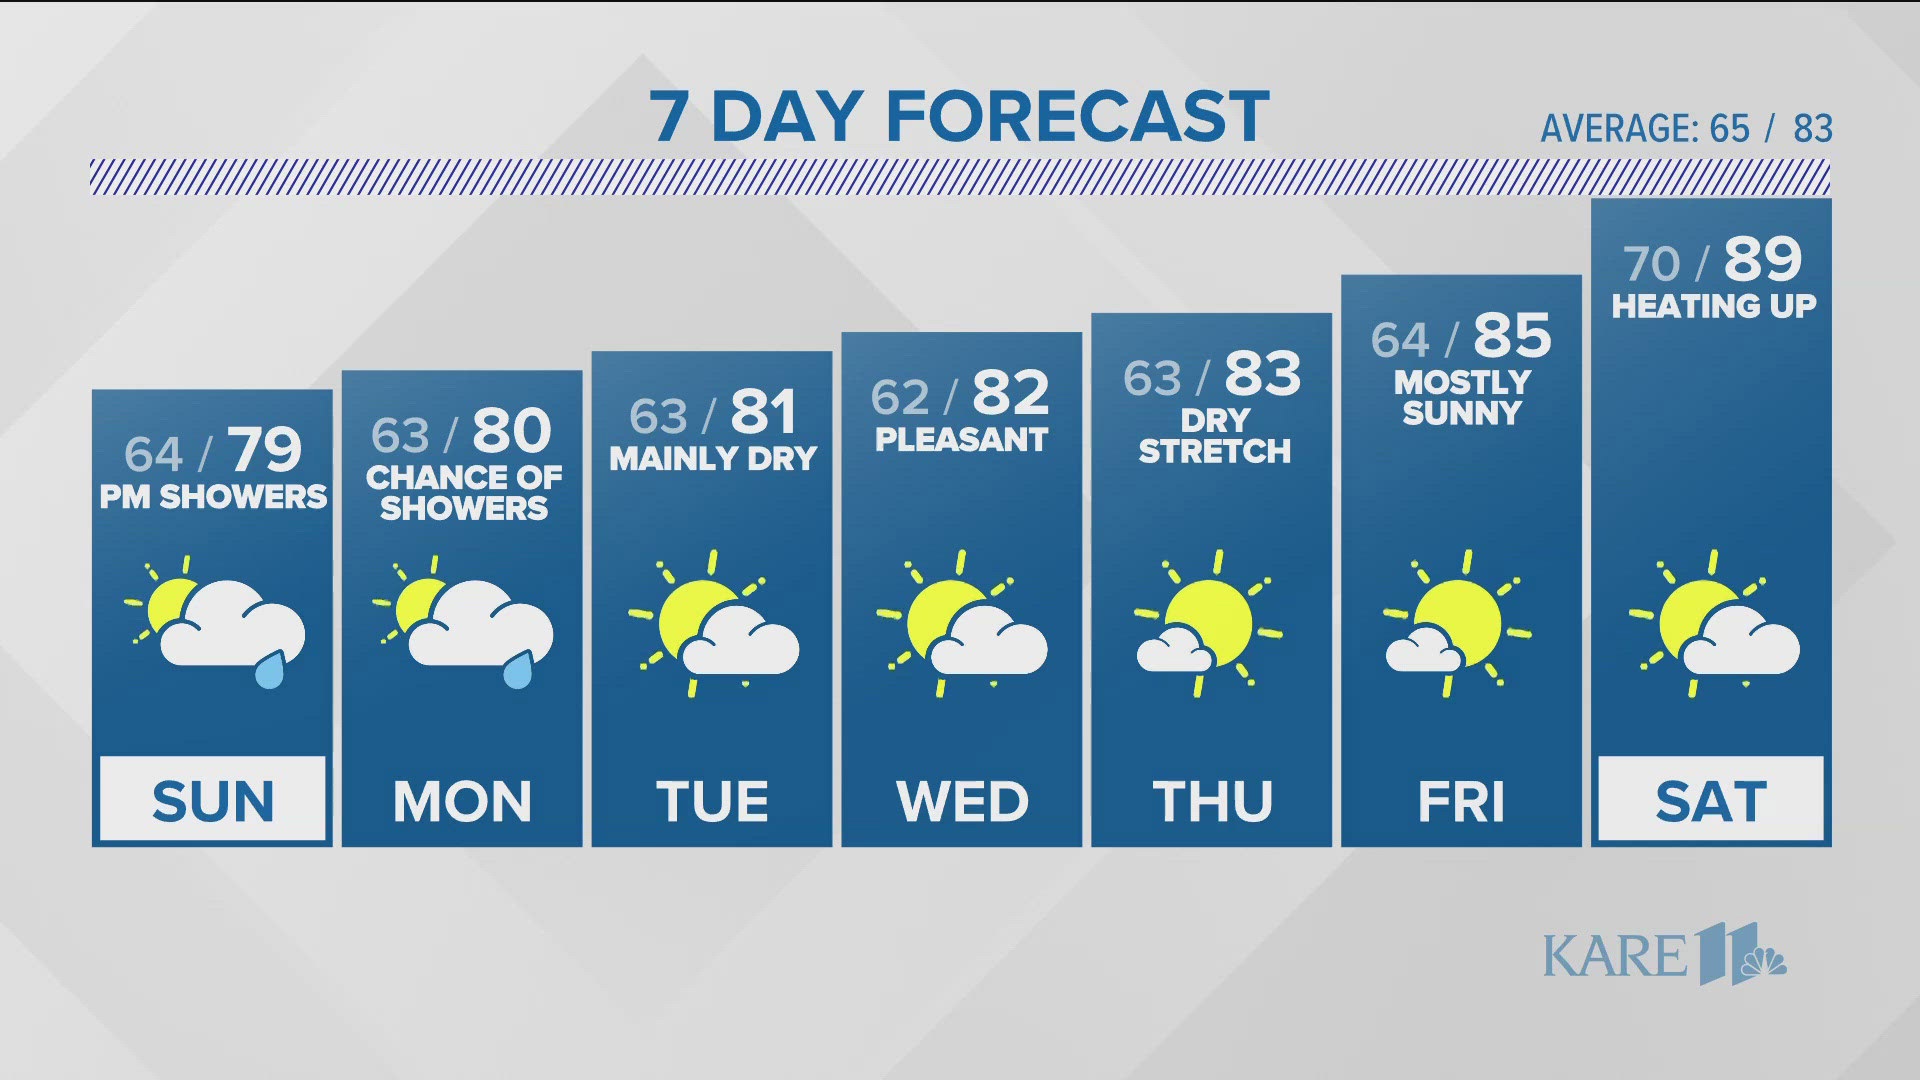 Overall, we're looking forward to more heat and less rain over the next seven days.